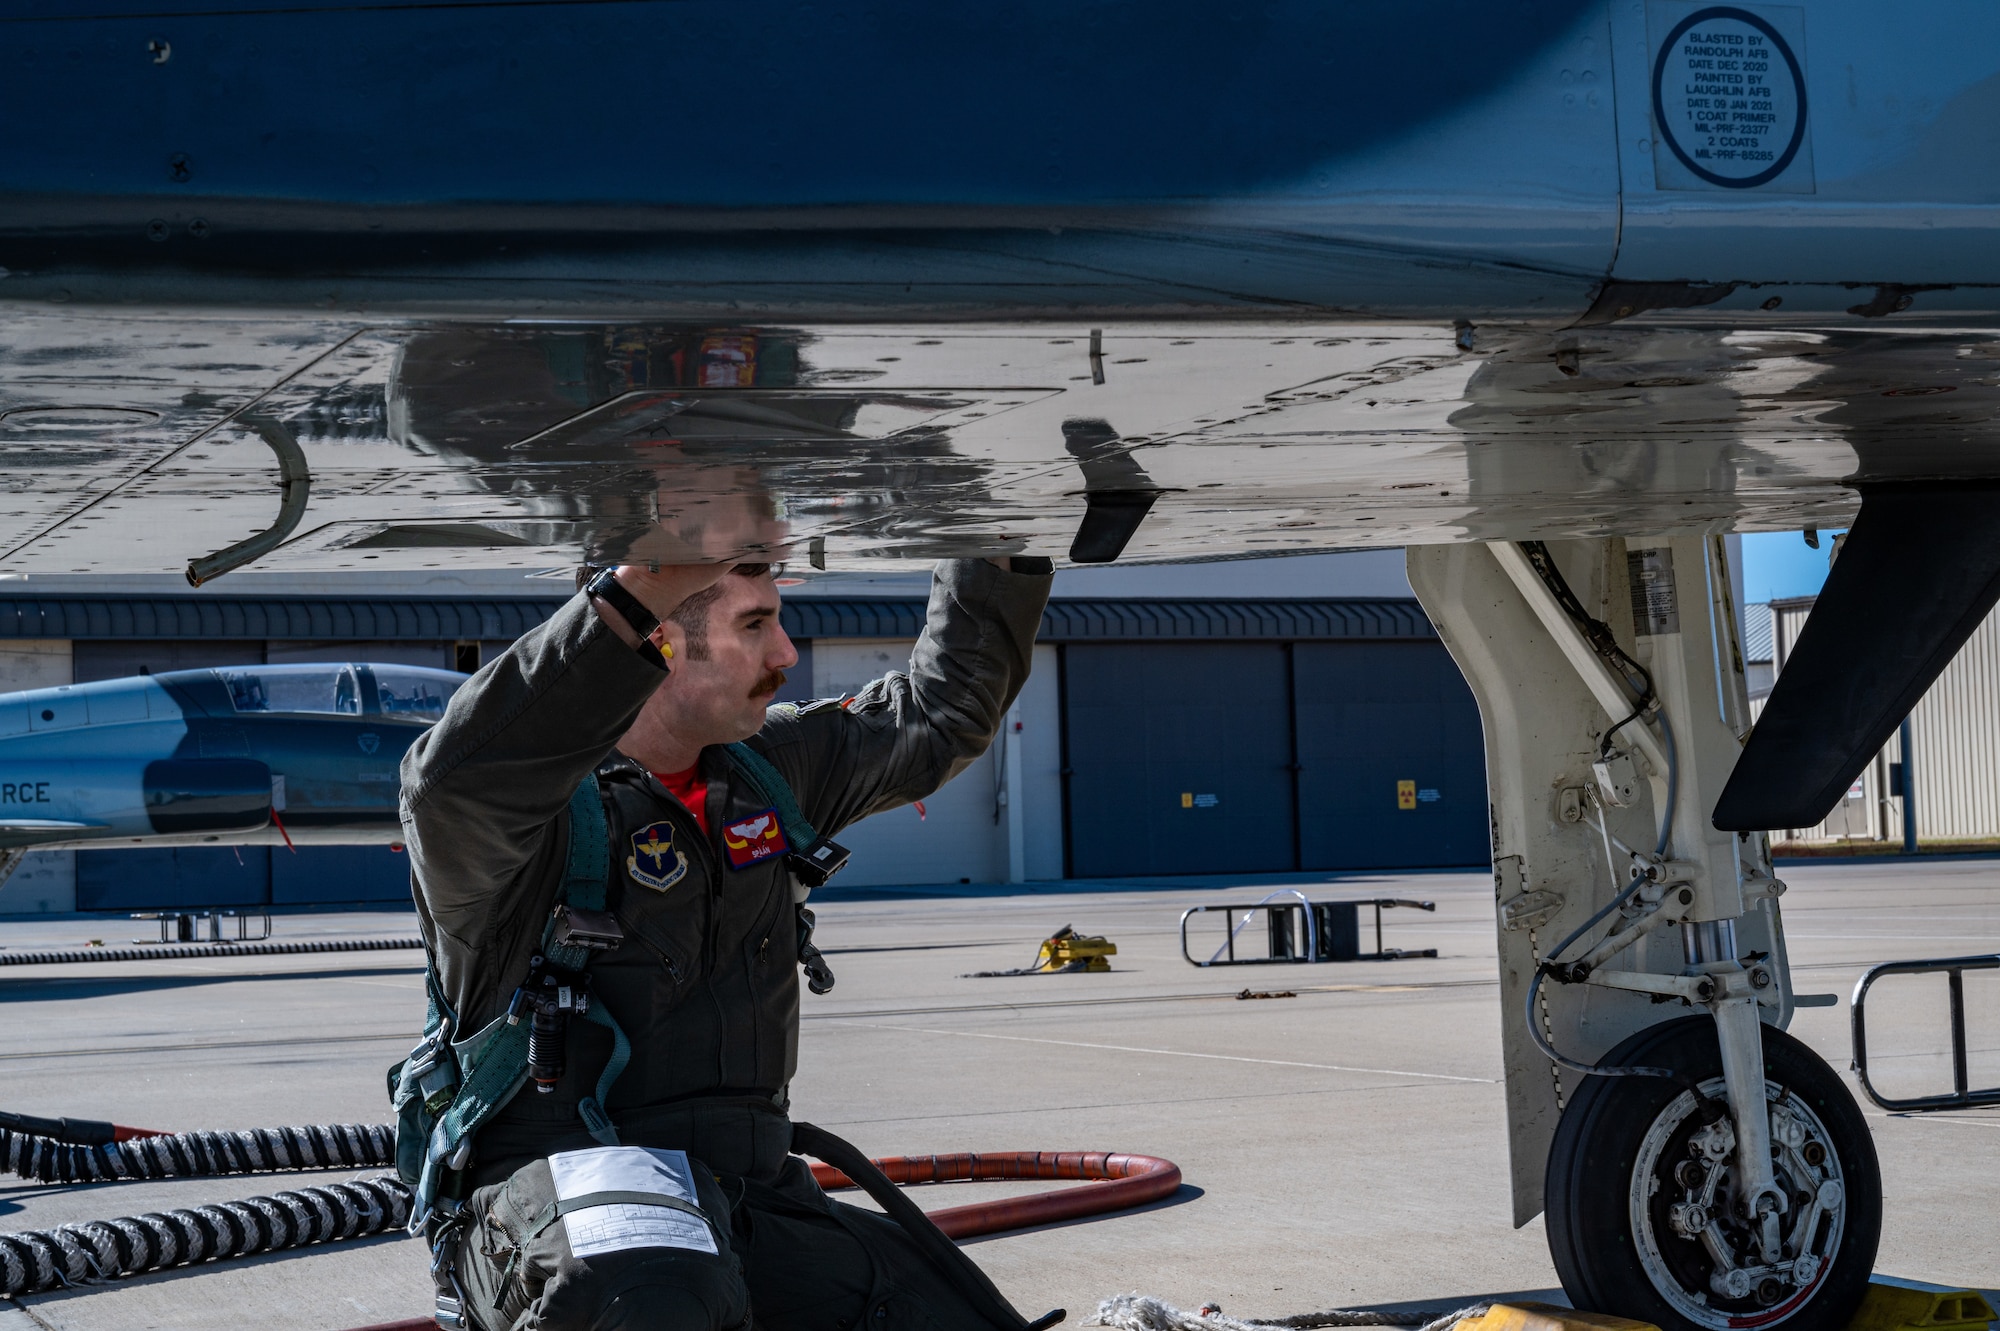 U.S. Air Force Capt. Garrett Green, 87th Flying Training Squadron, instructor pilot, performs his pre-flight inspections before a standard cross country with students to hone their skills on Jan. 13, 2023, at Laughlin Air Force Base, Texas. Cross country missions have students fly to different locations over the course of several days, to gain a large amount of flying time and test what they have learned. (U.S. Air Force photo by Senior Airman David Phaff)